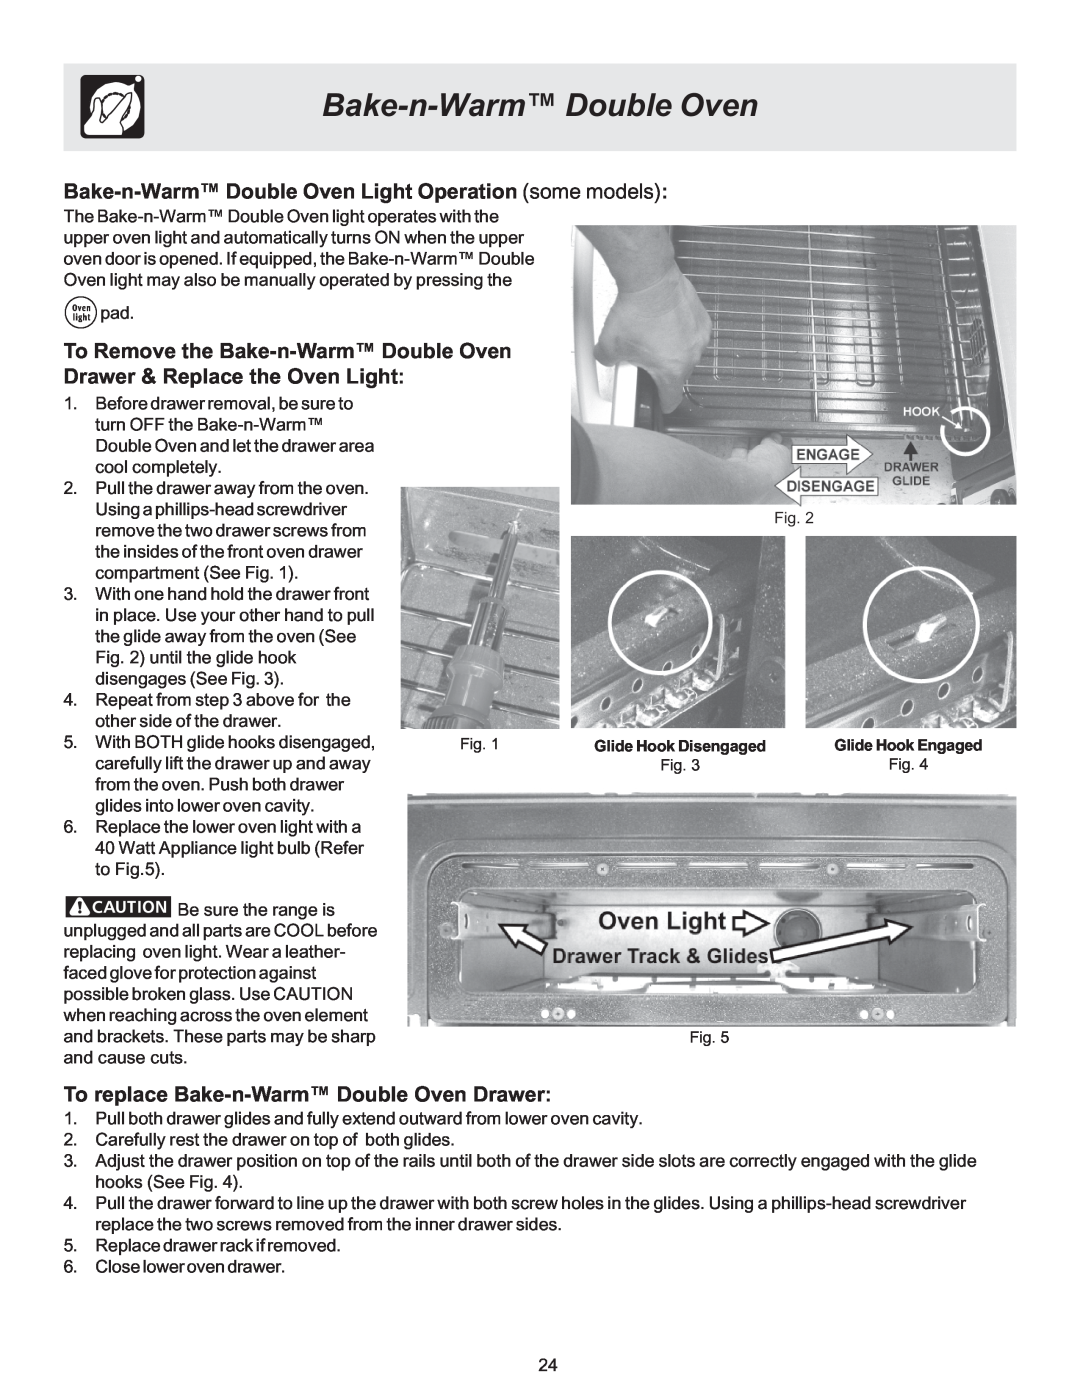 Frigidaire 316417137 REV-A Bake-n-Warm Double Oven Light Operation some models, To replace Bake-n-Warm Double Oven Drawer 